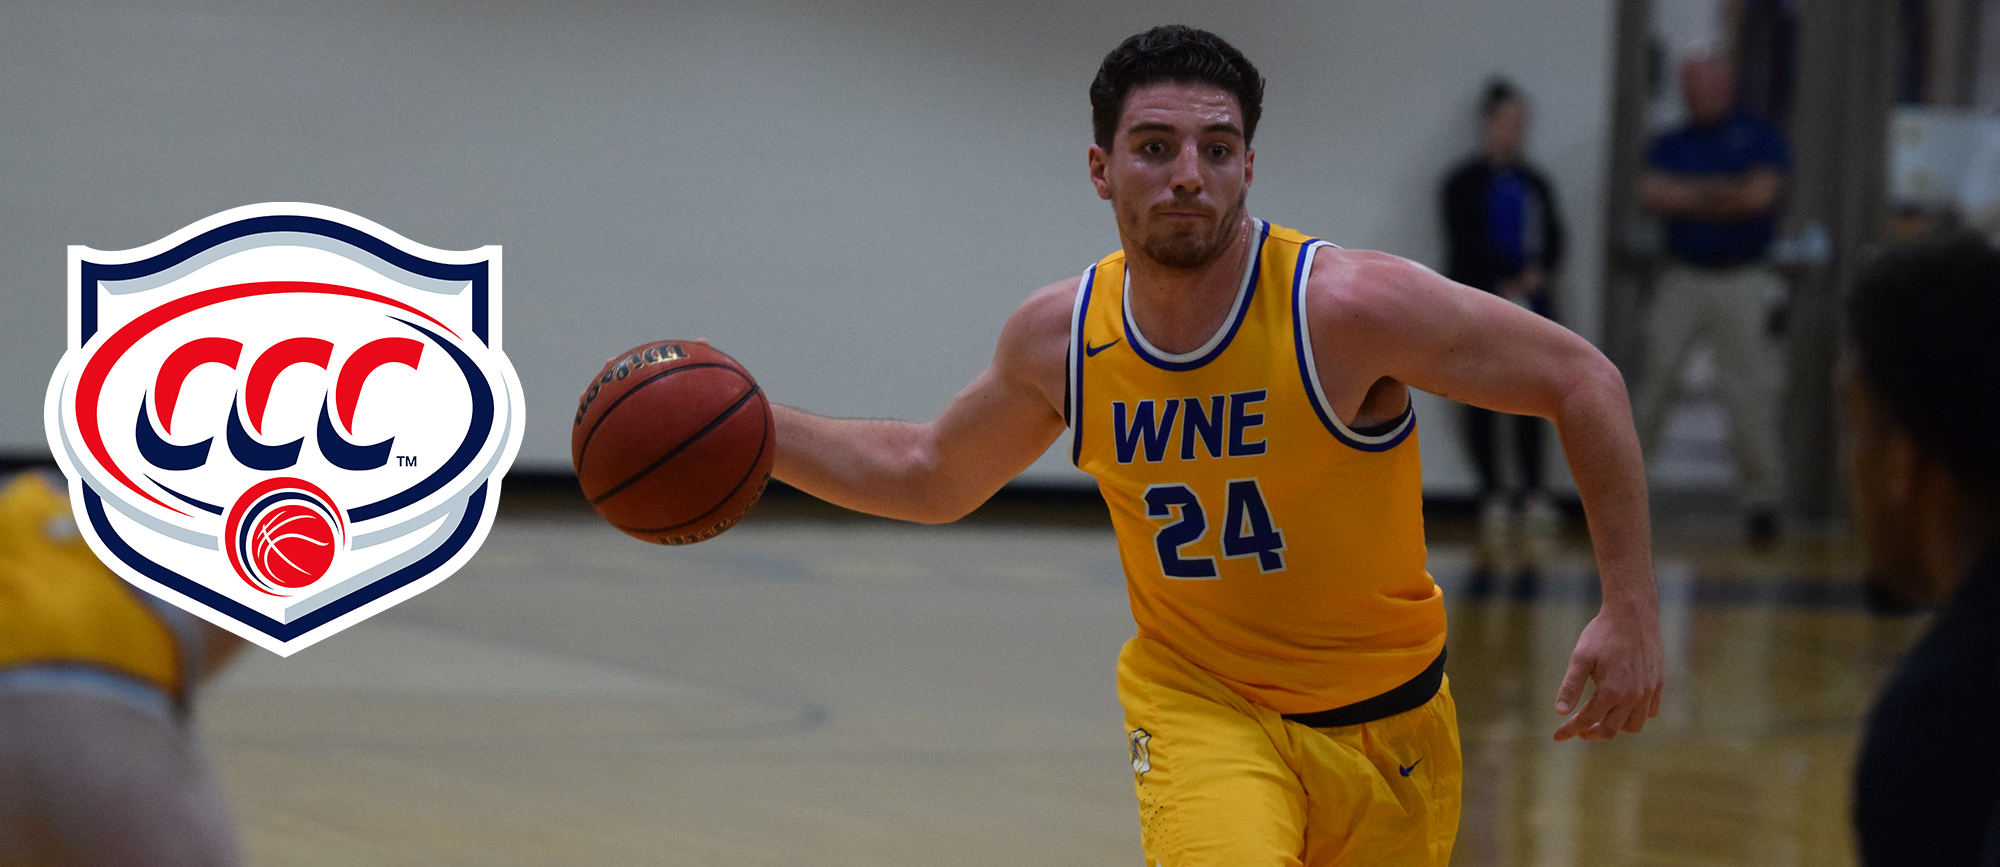 Tim Reilly Earns First Career CCC Player of the Week Award